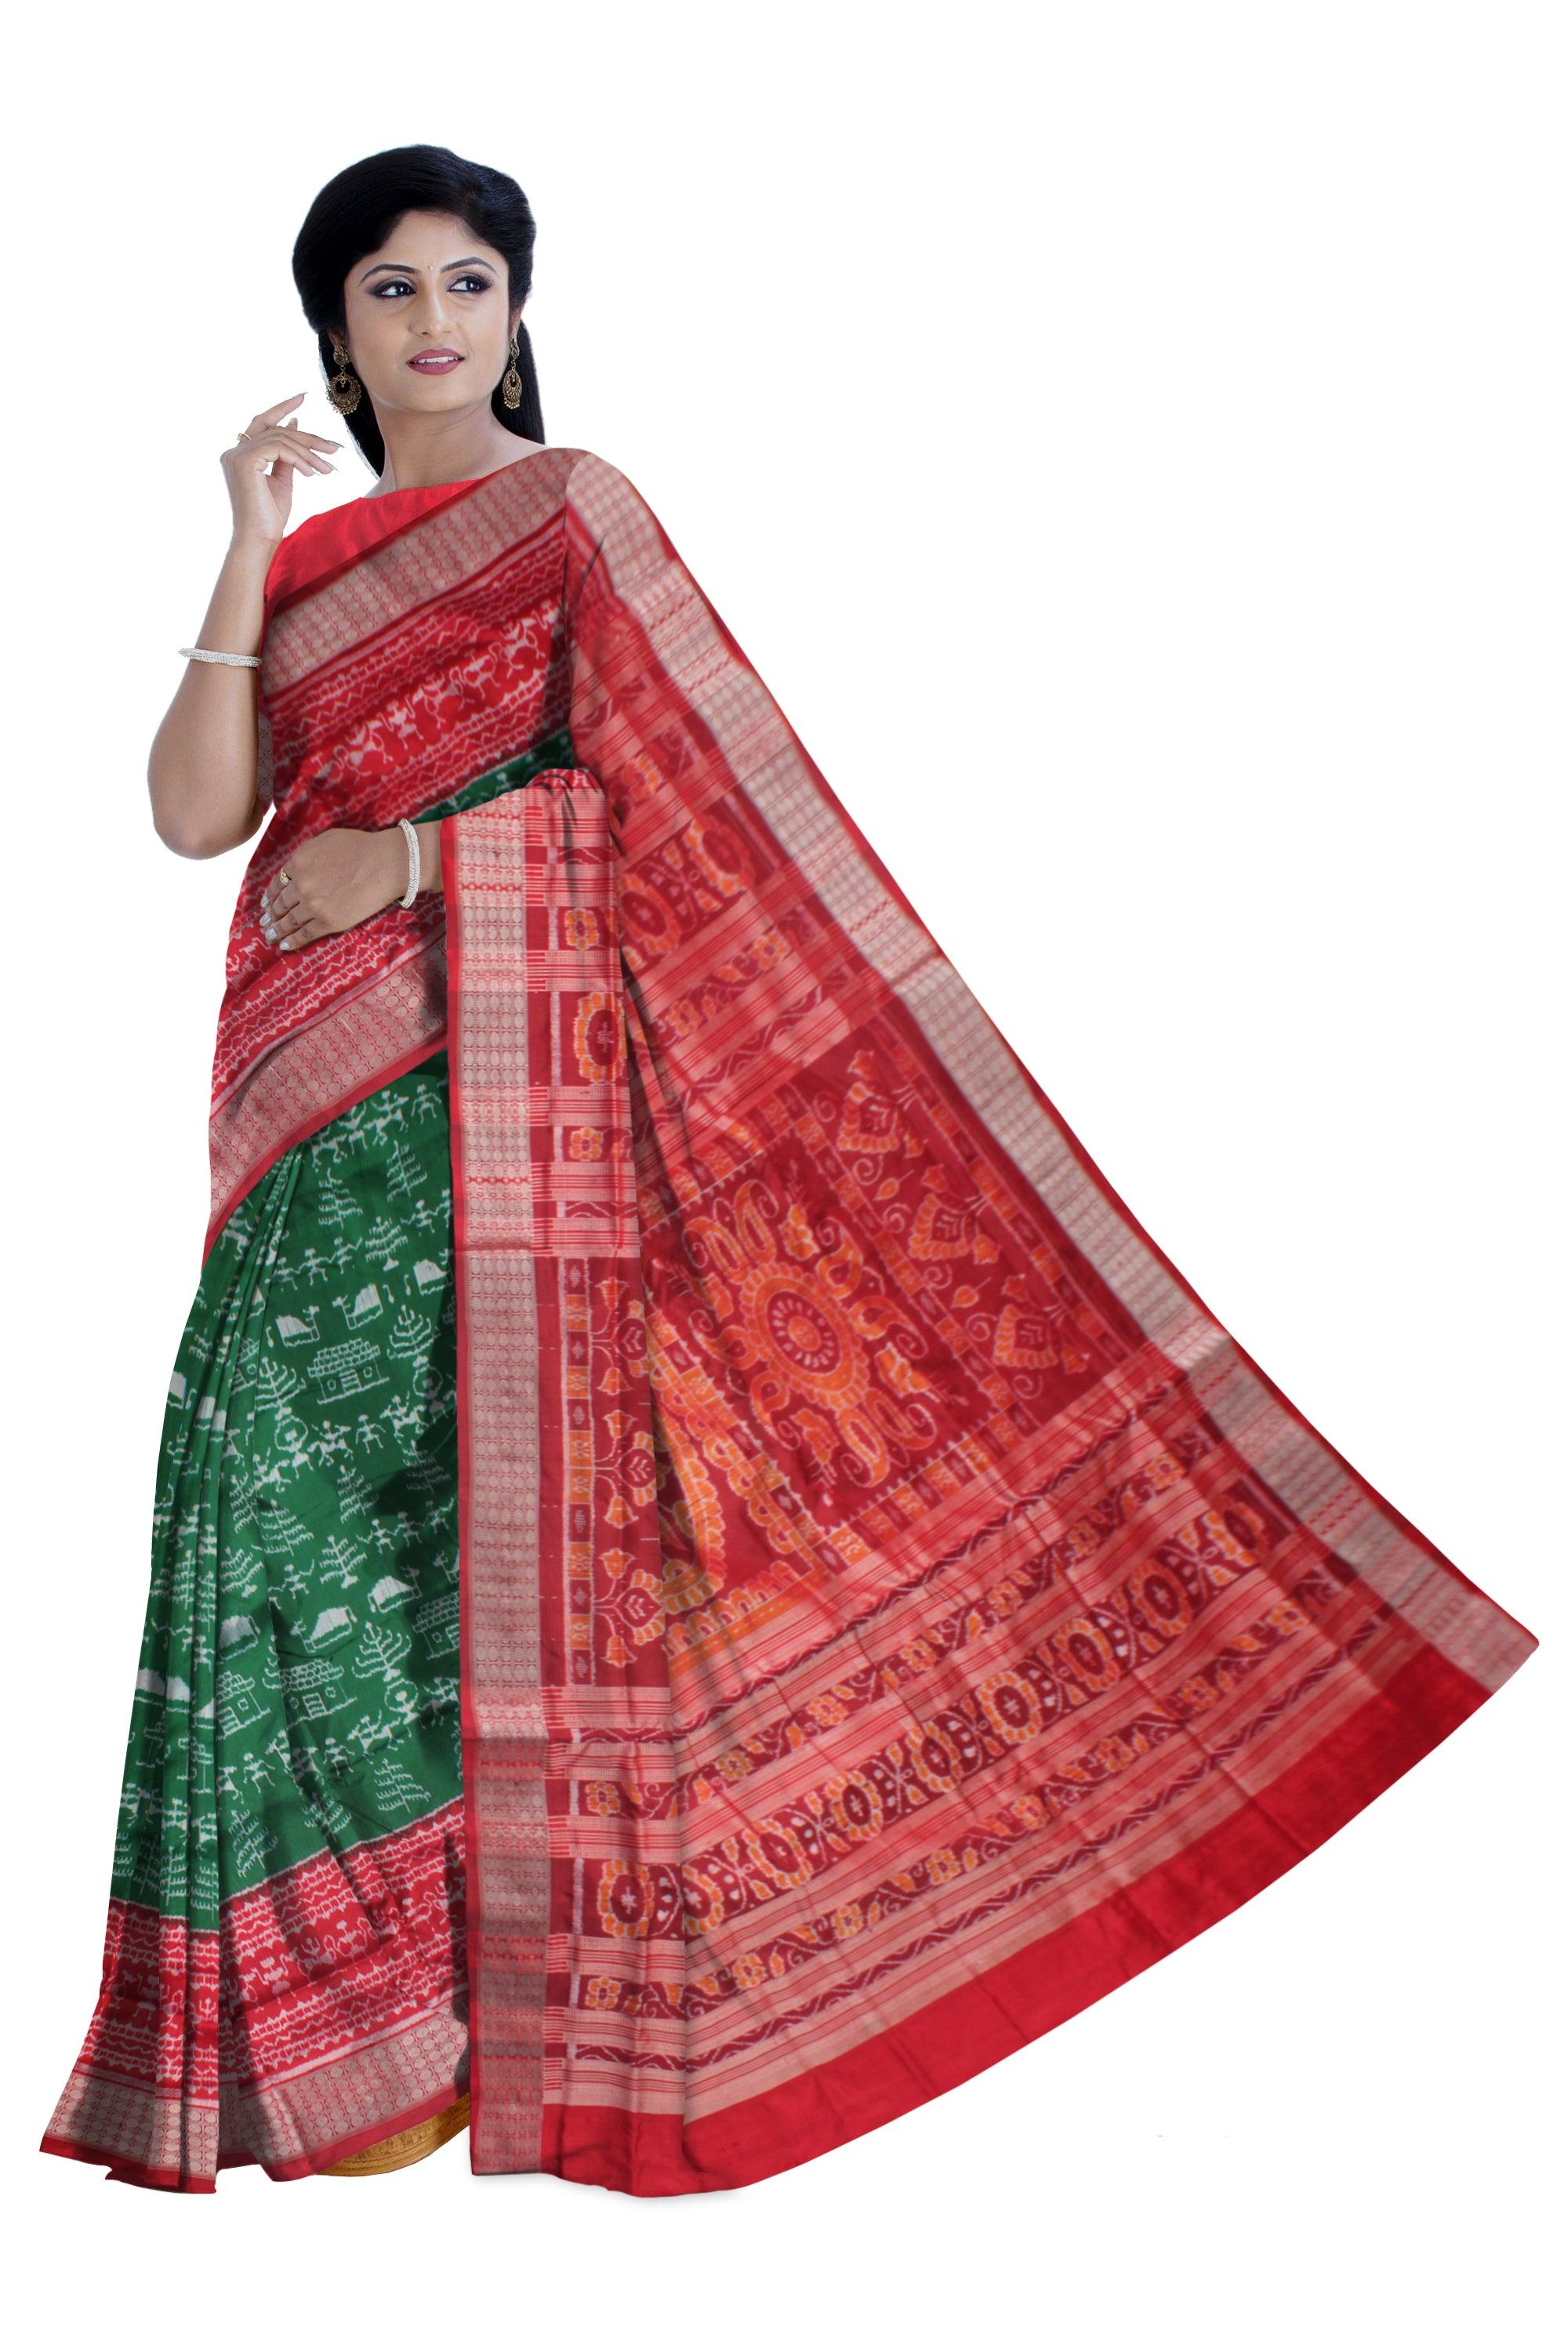 TRADITIONAL TERRACOTTA PATTERN PURE SILK SAREE IS GREEN AND RED COLOR BASE, ATTACHED WITH BLOUSE PIECE. - Koshali Arts & Crafts Enterprise